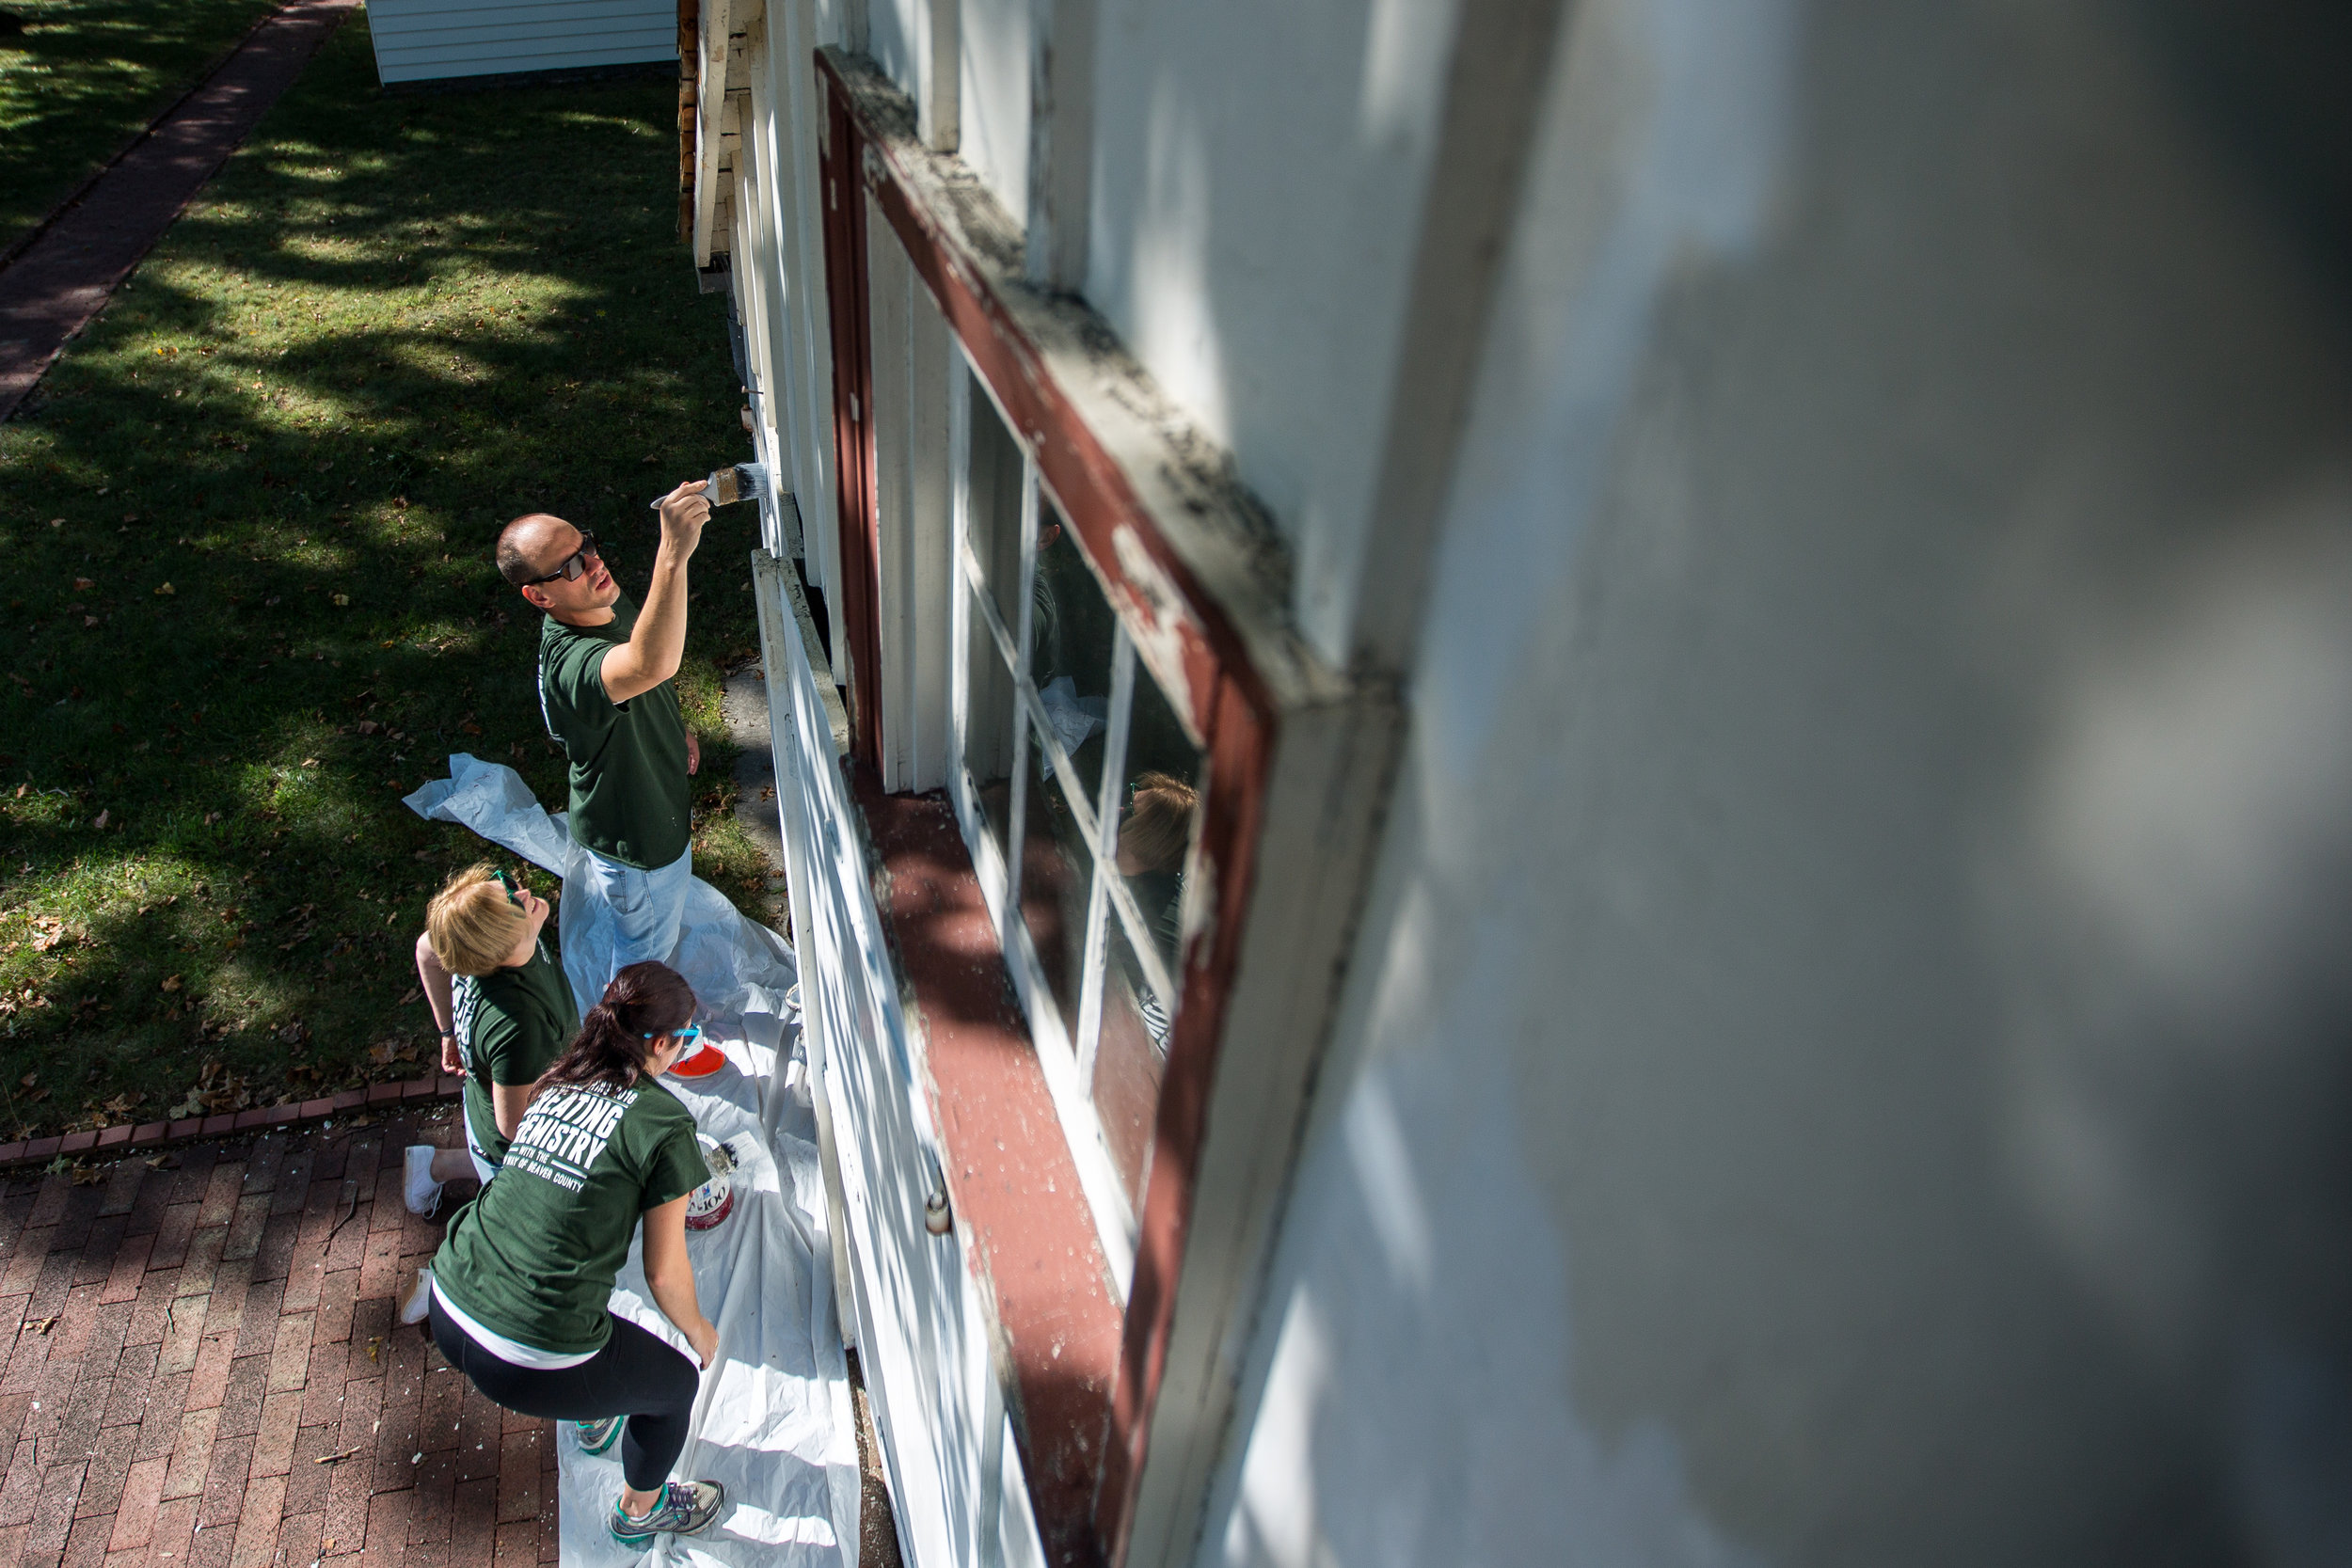  Matt Nosal, top, Susan McMullen and Jamie Telesz work on painting the side of the Blacksmith Shop at Old Economy Village on Wednesday morning. They were part of the United Way of Beaver County Day of Caring, bringing over 100 volunteers together to 